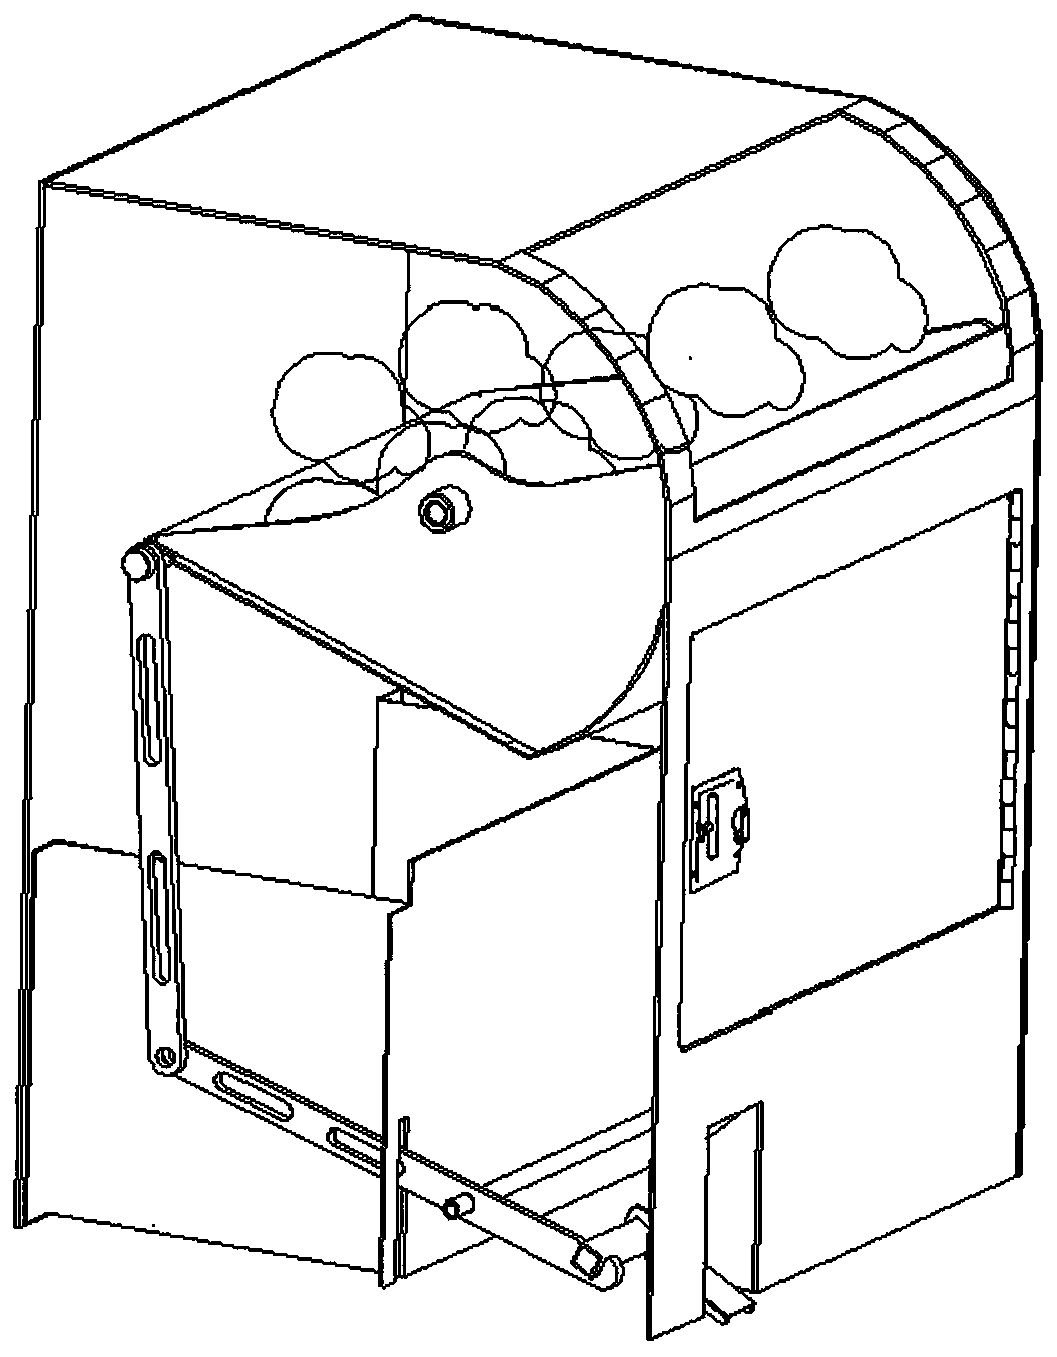 Buried garbage collection device